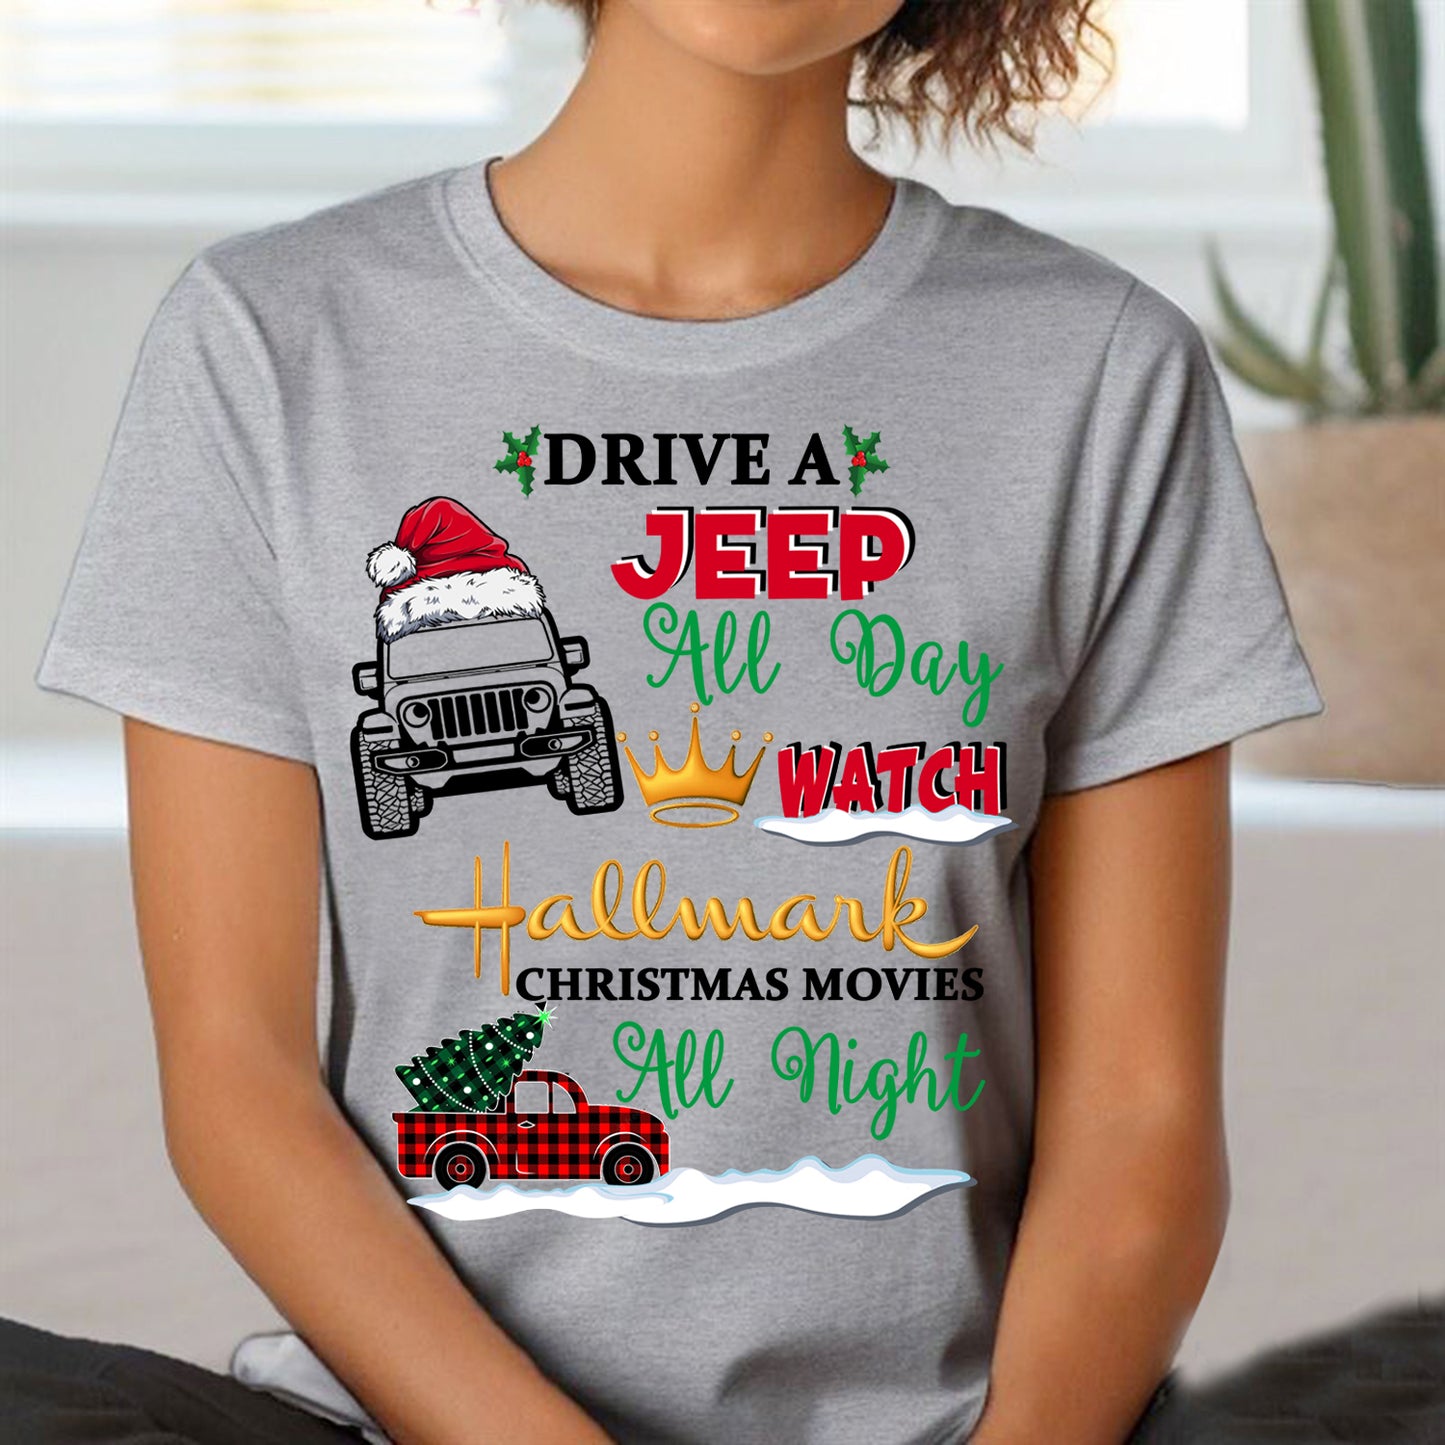 Drive a Jepp all day watch Christmas movies all night